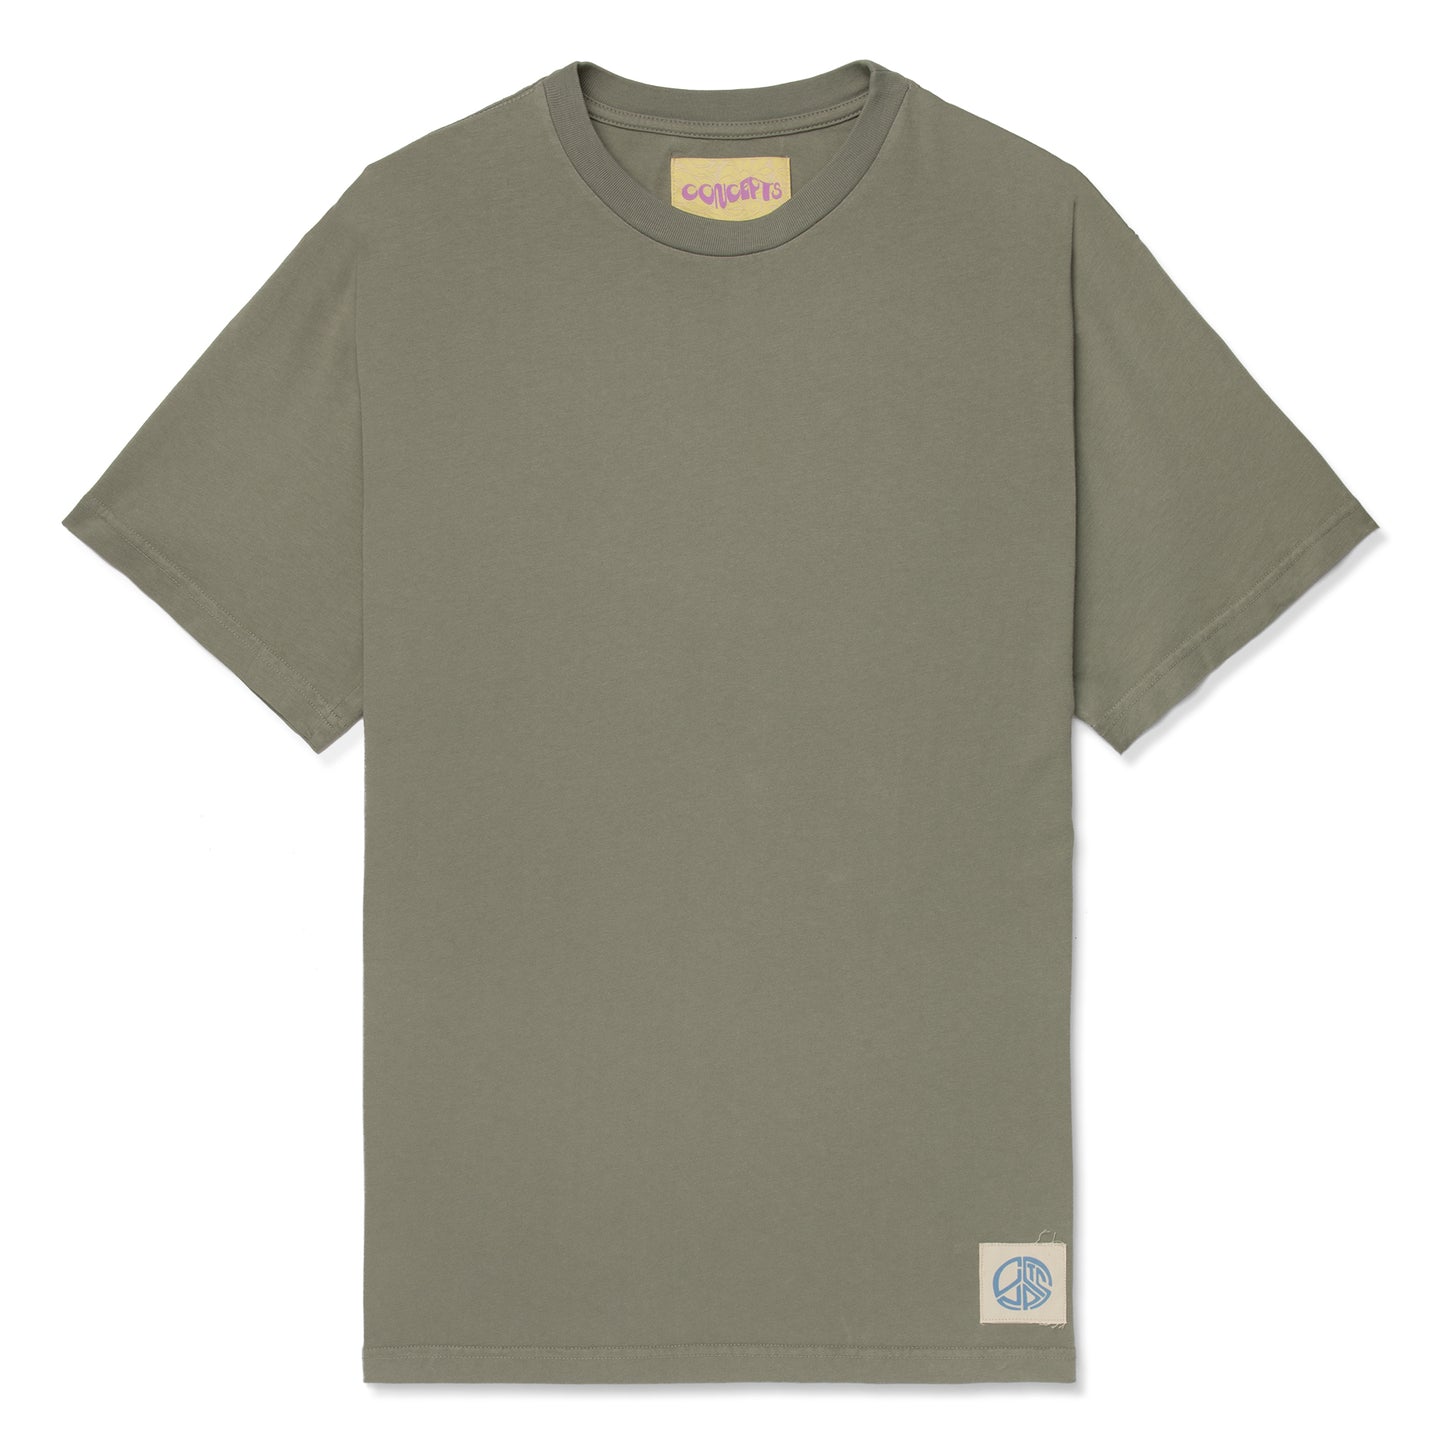 Concepts Patch Tee (Moss Green)